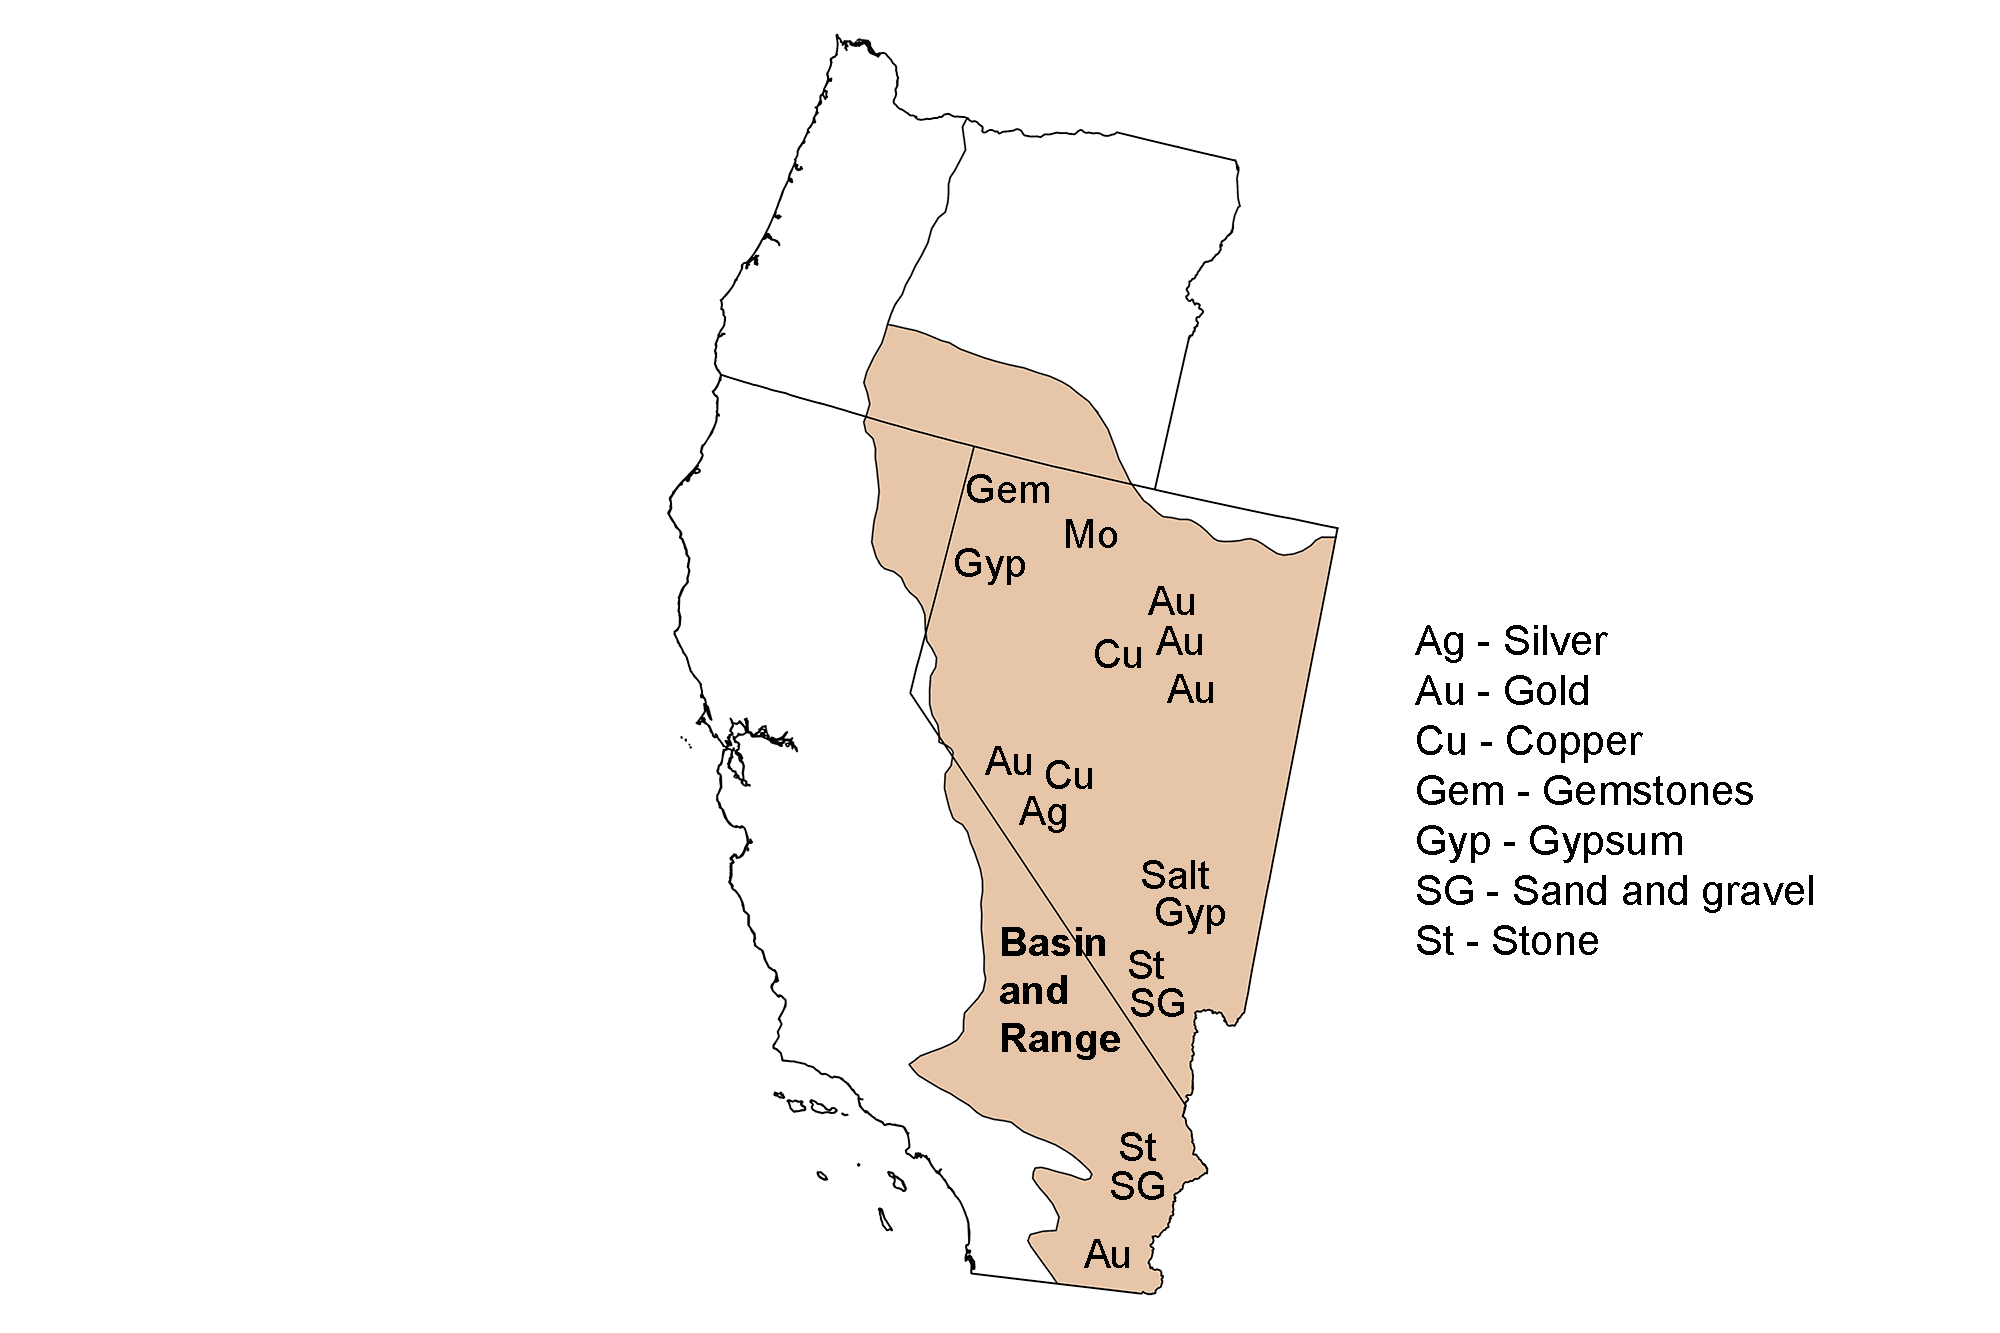 Map showing the locations of major mineral deposits in the Basin and Range region of the western United States.